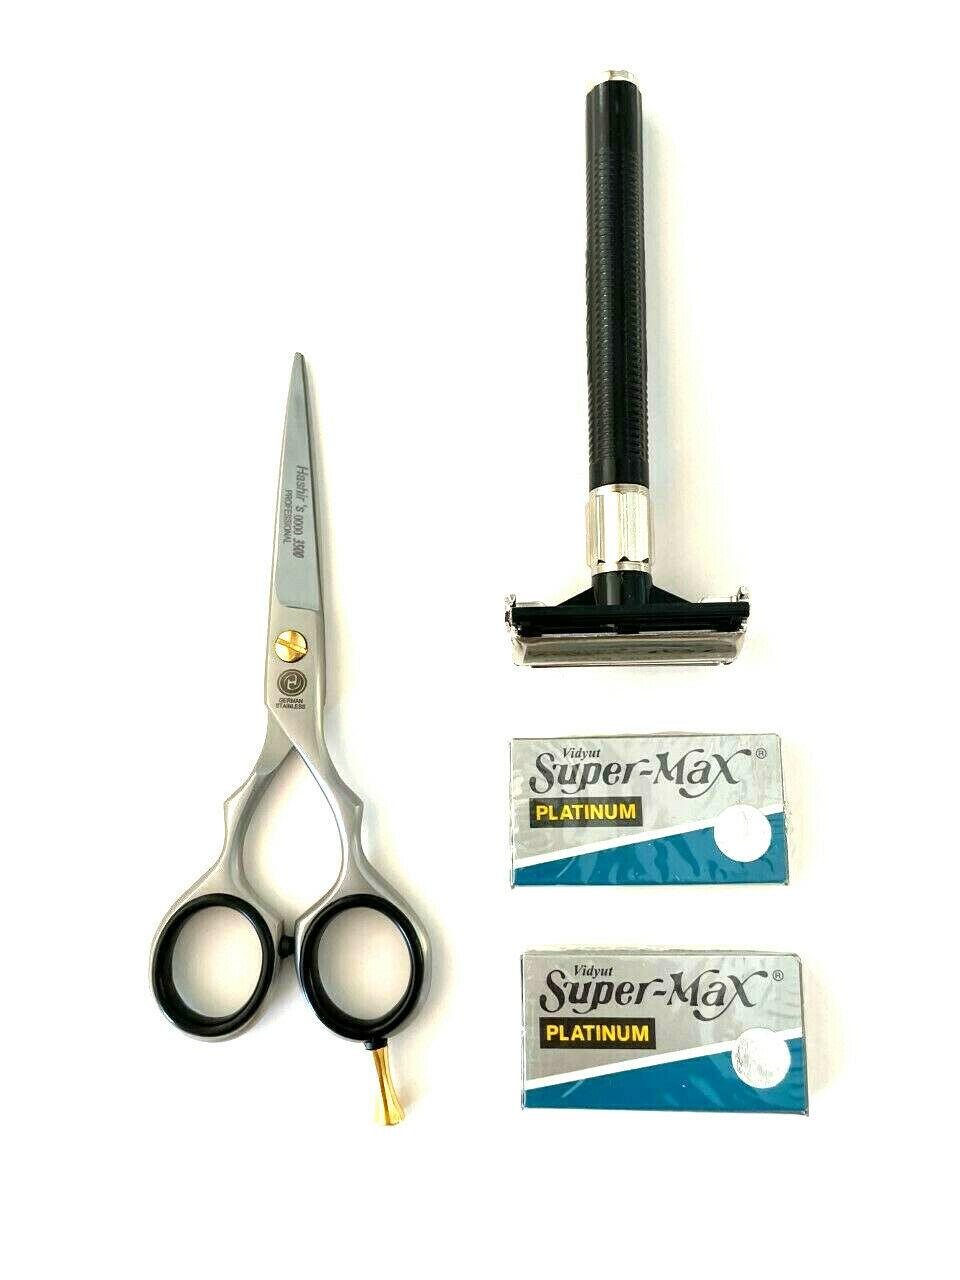 8 Big Super Sharp Scissors - Perfect for Hair-Stylist,, Hashir Products